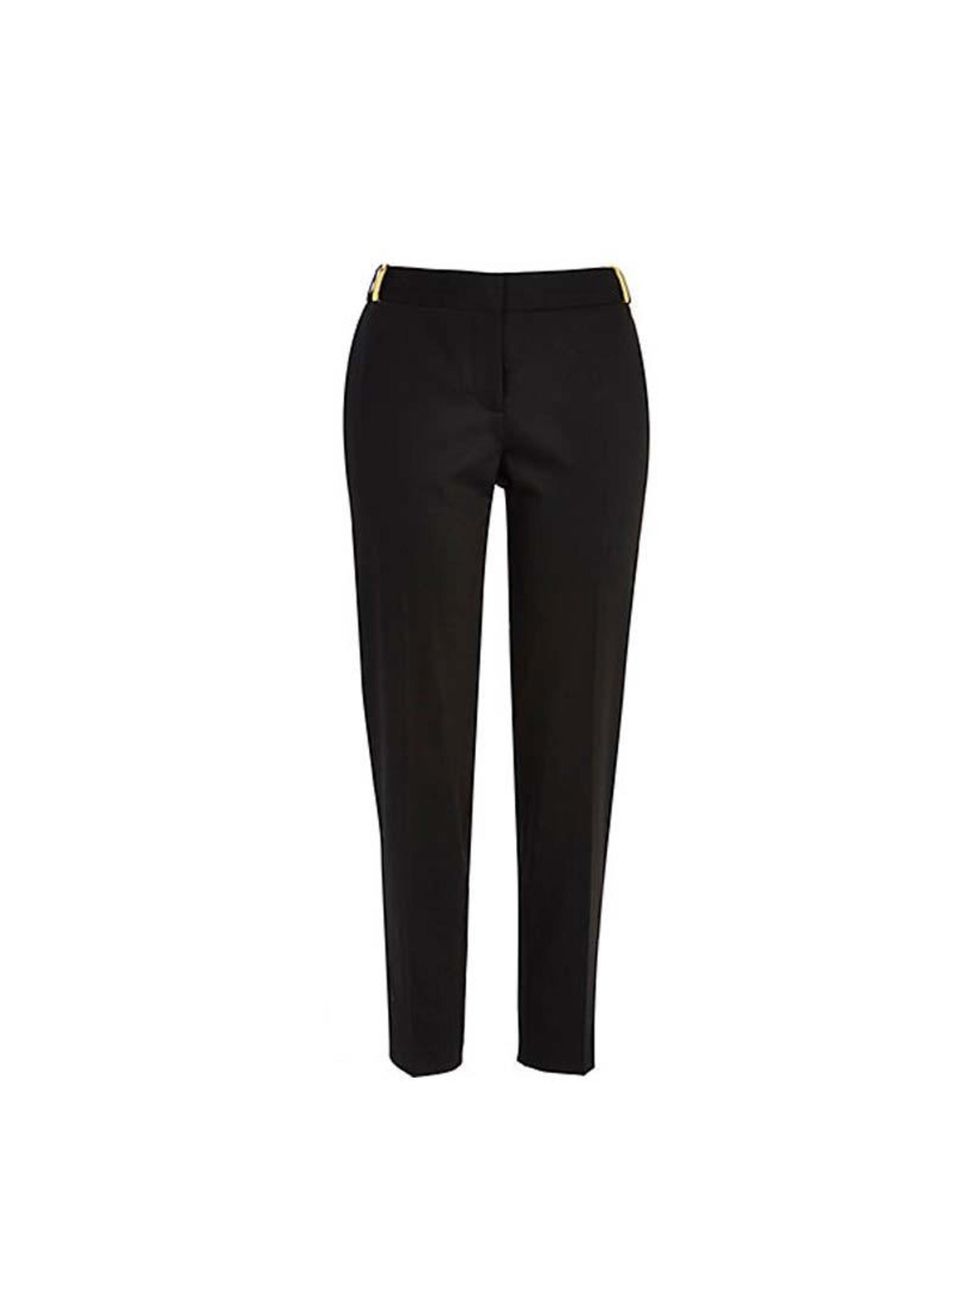 <p>Team the coat with a pair of cigarette trousers. They are easy and comfortable to wear. </p><p>These are from <a href="http://www.riverisland.com/women/trousers--leggings/slim-trousers/Black-cigarette-pants-651542">River Island</a>, £30</p>